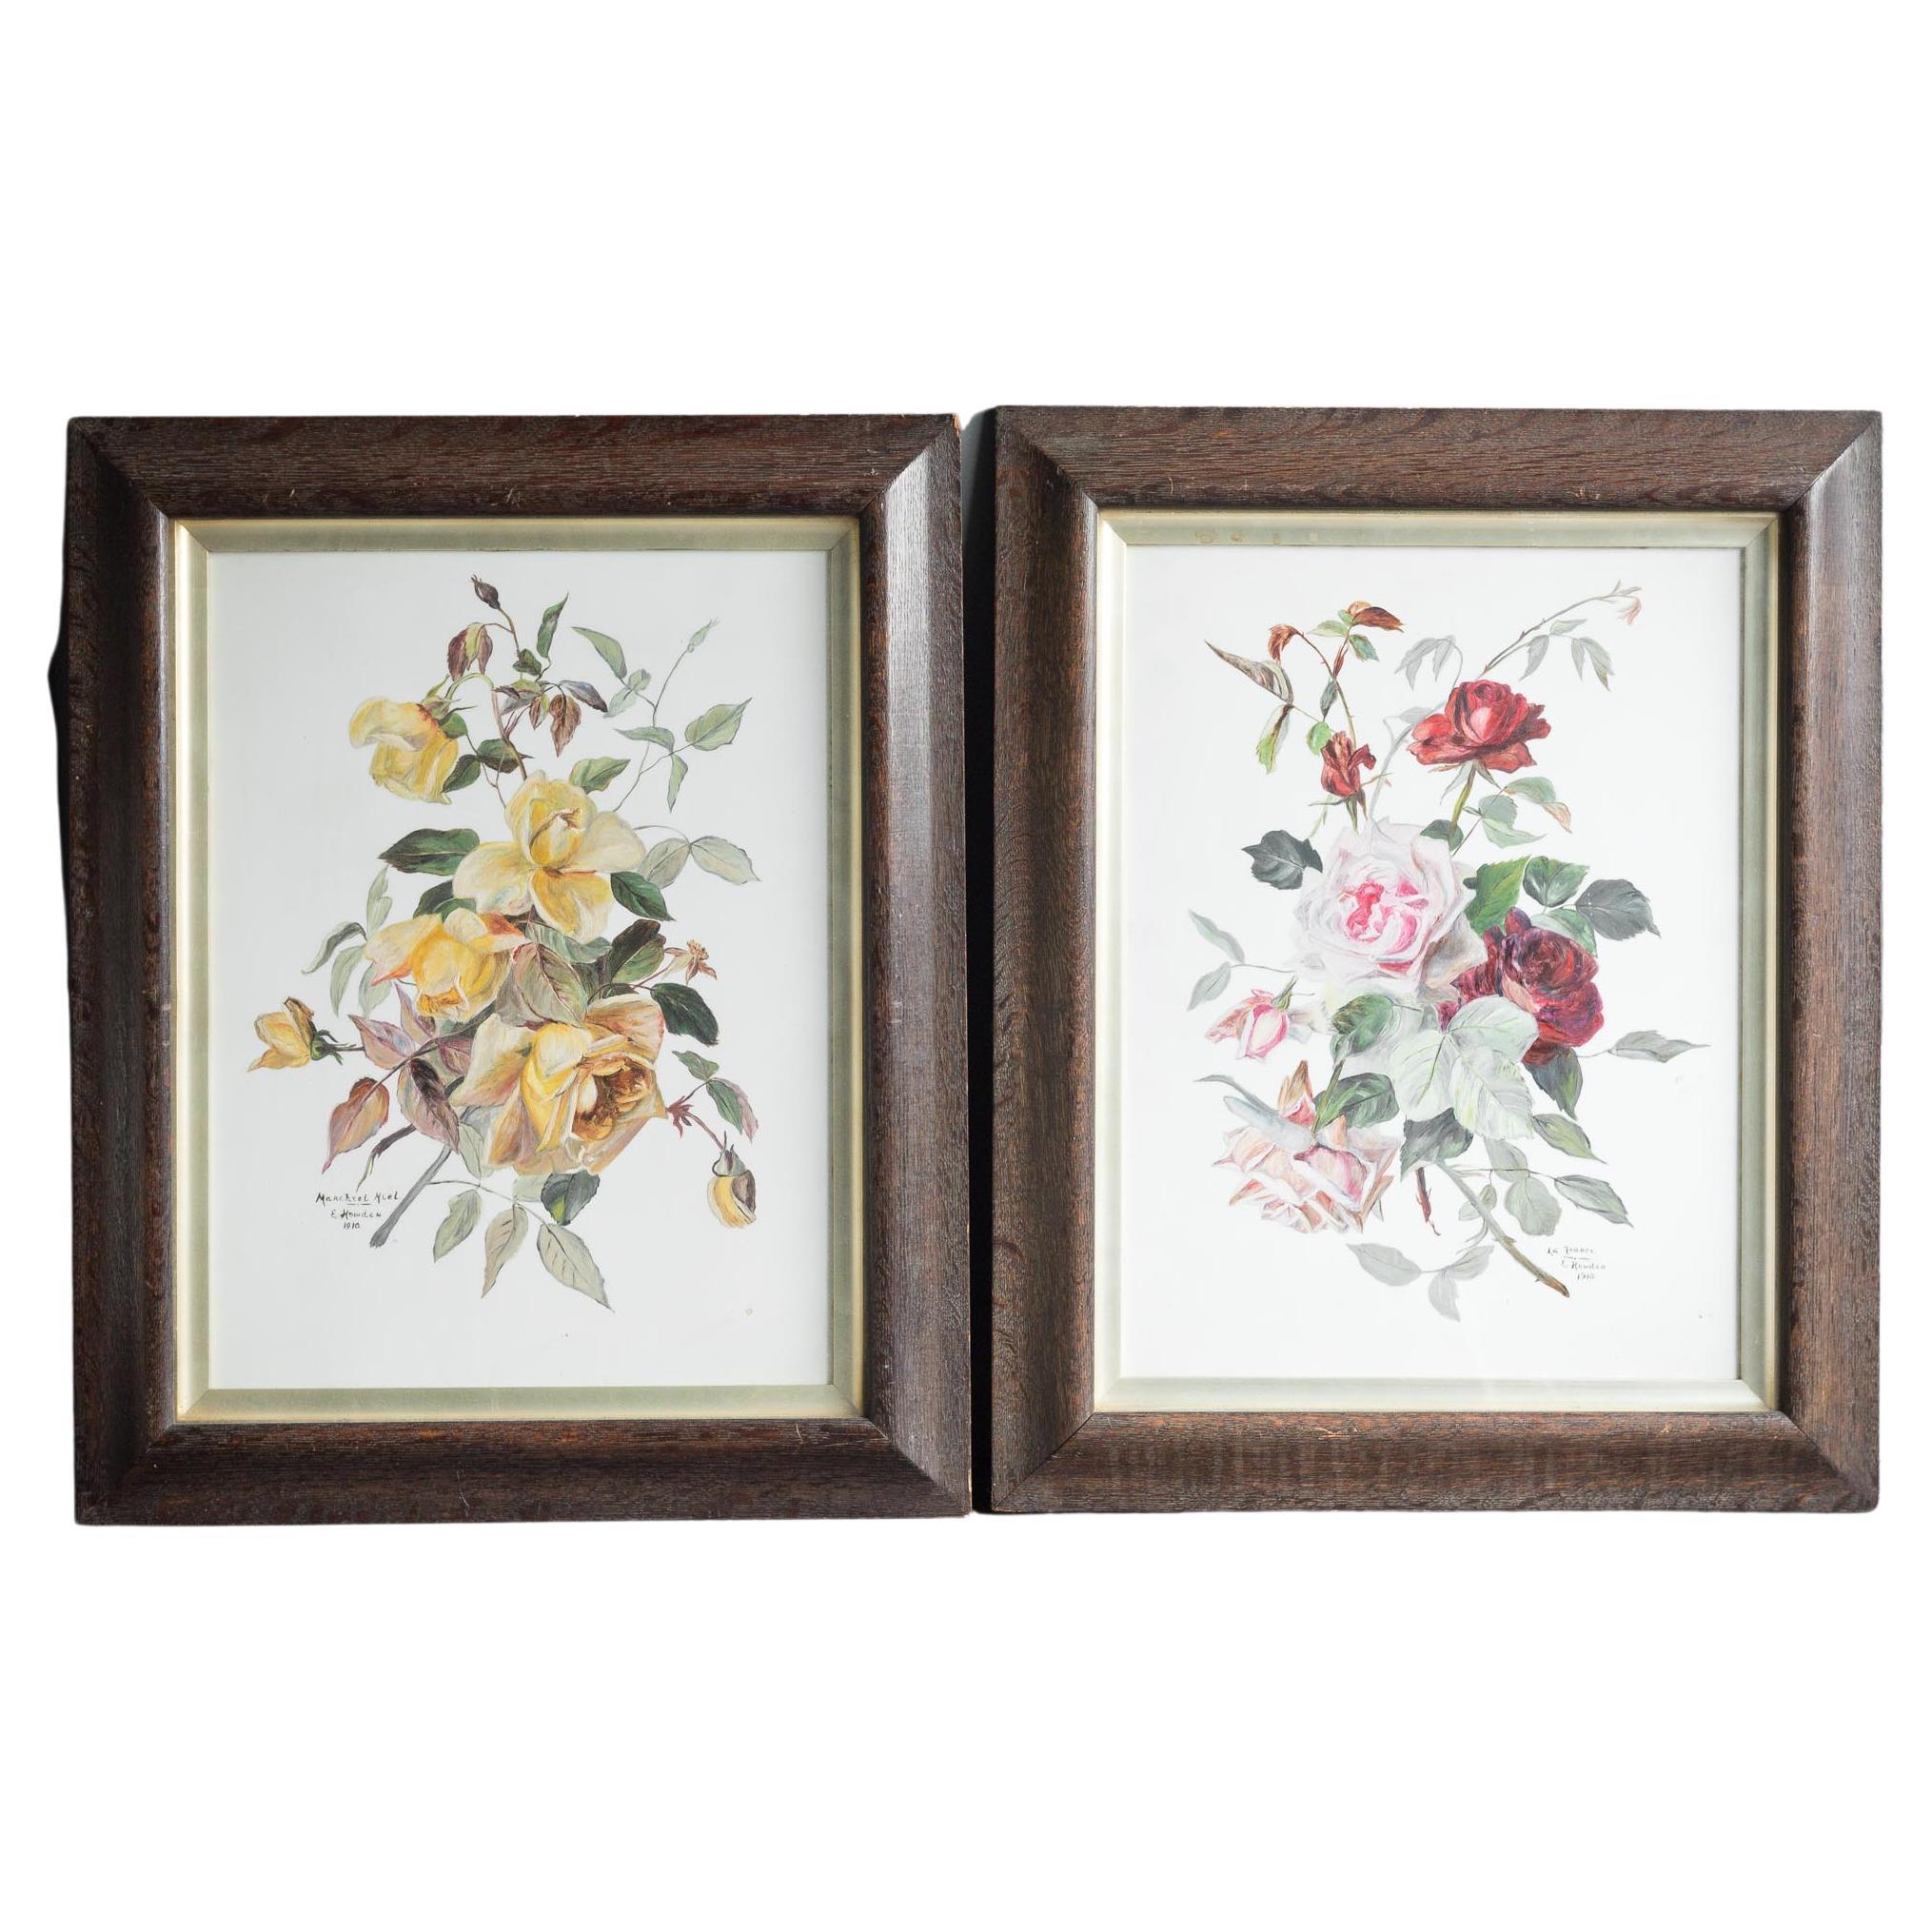 E. Howden Pair of Floral Paintings, Framed and Signed